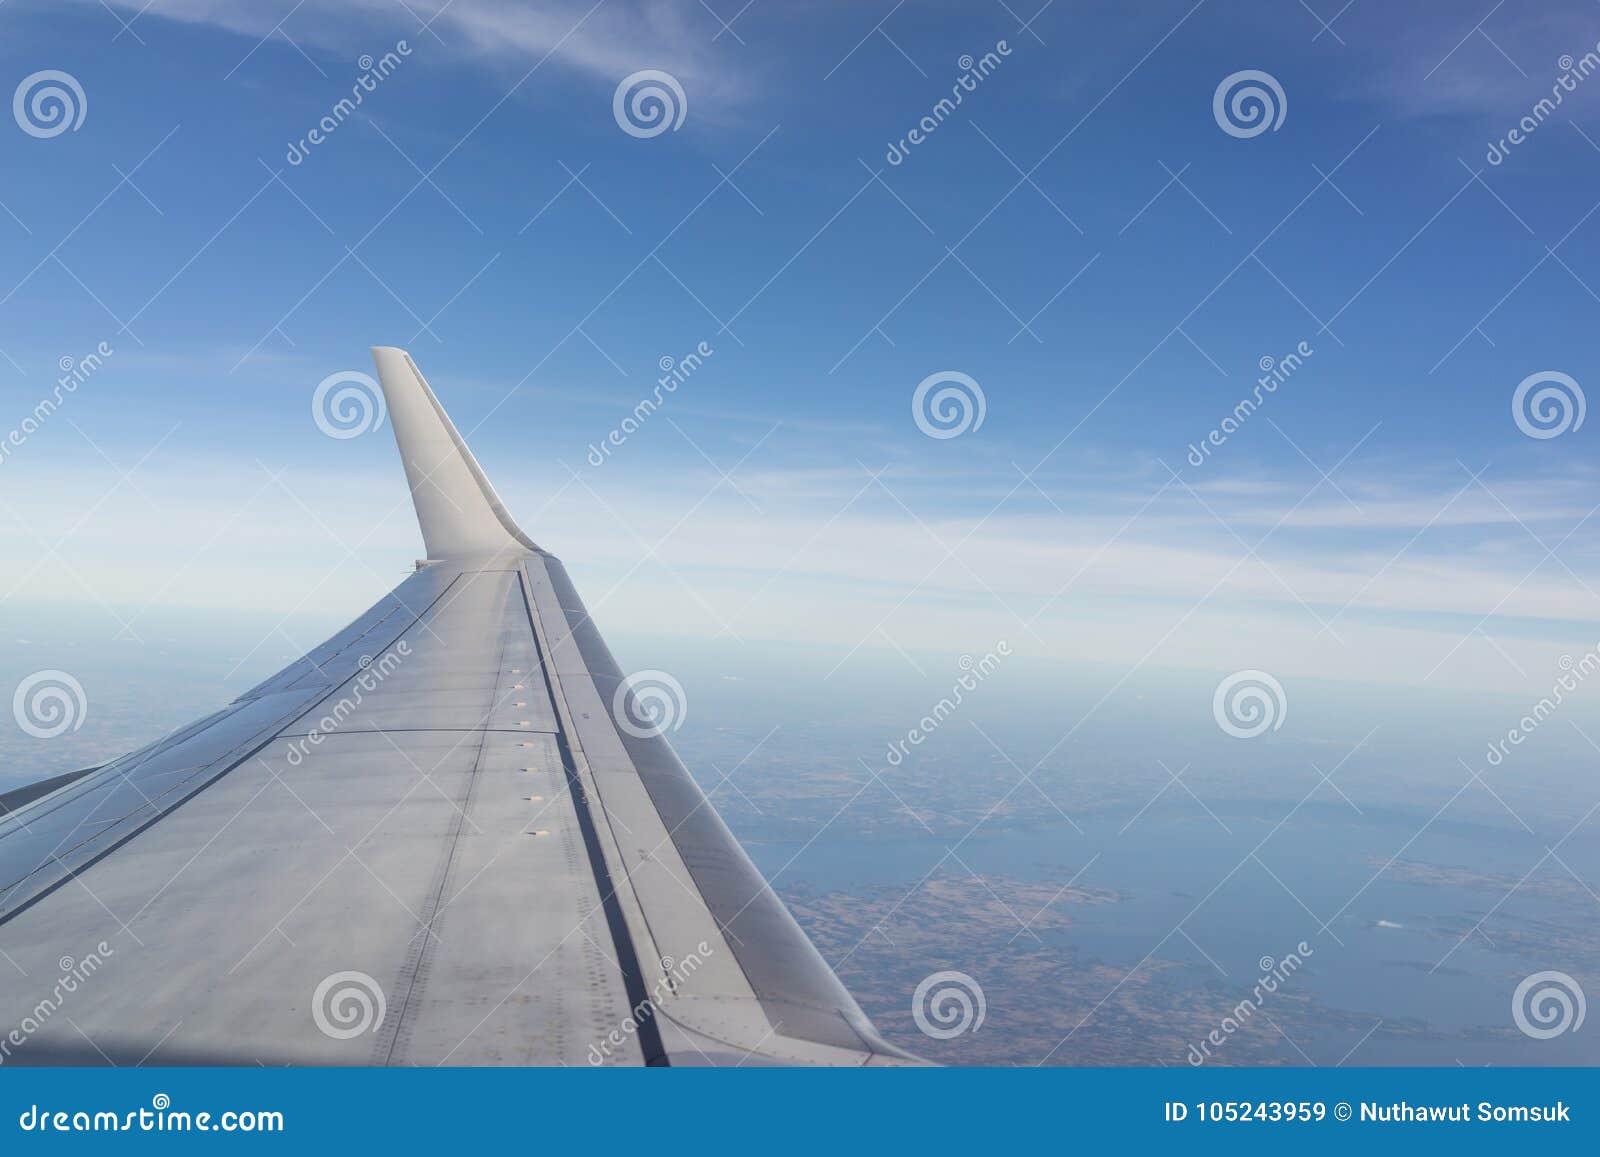 aerial wing of airplane in bright blue sky day light using as va